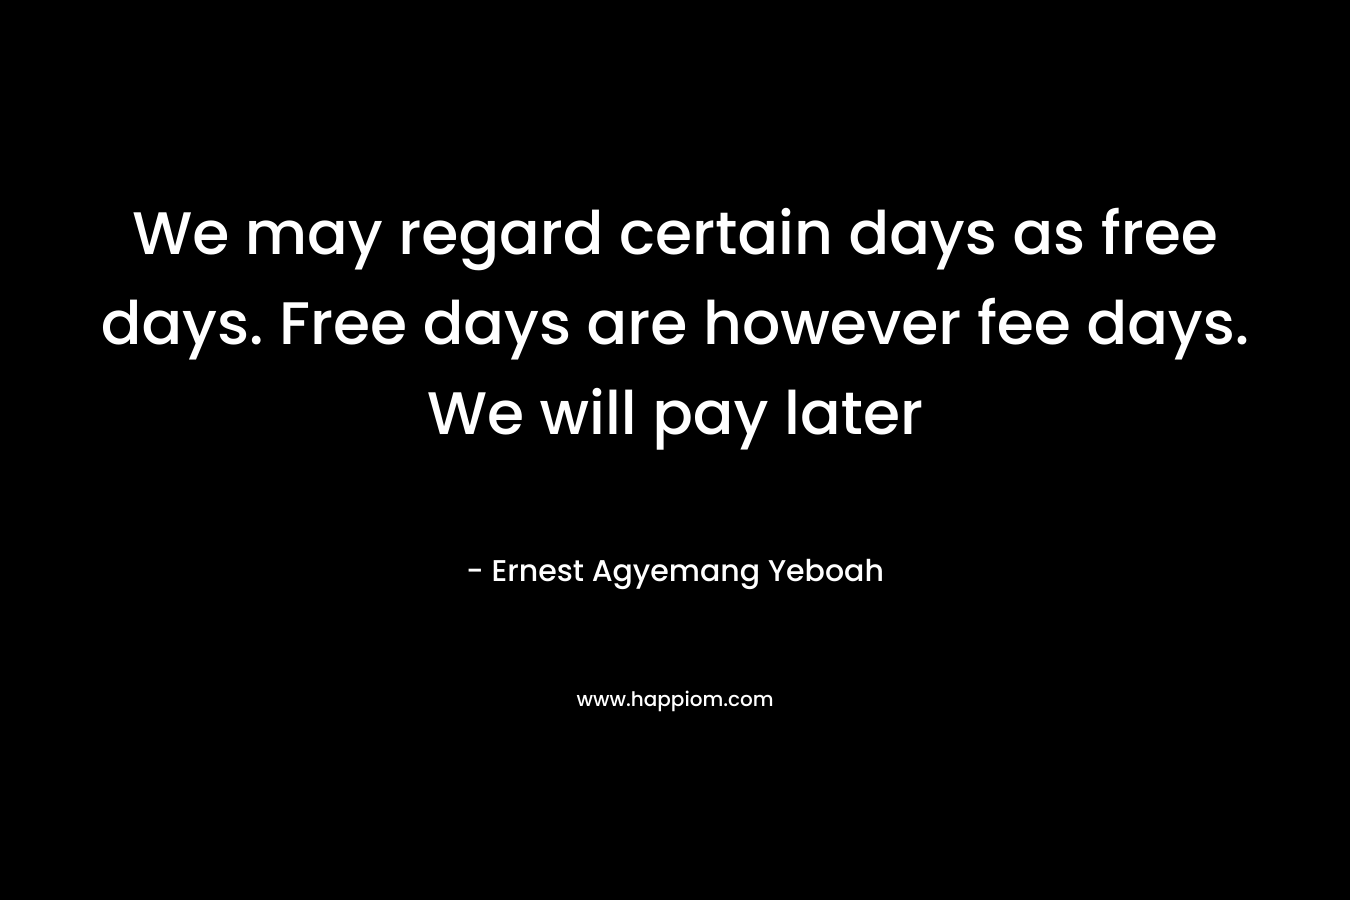 We may regard certain days as free days. Free days are however fee days. We will pay later